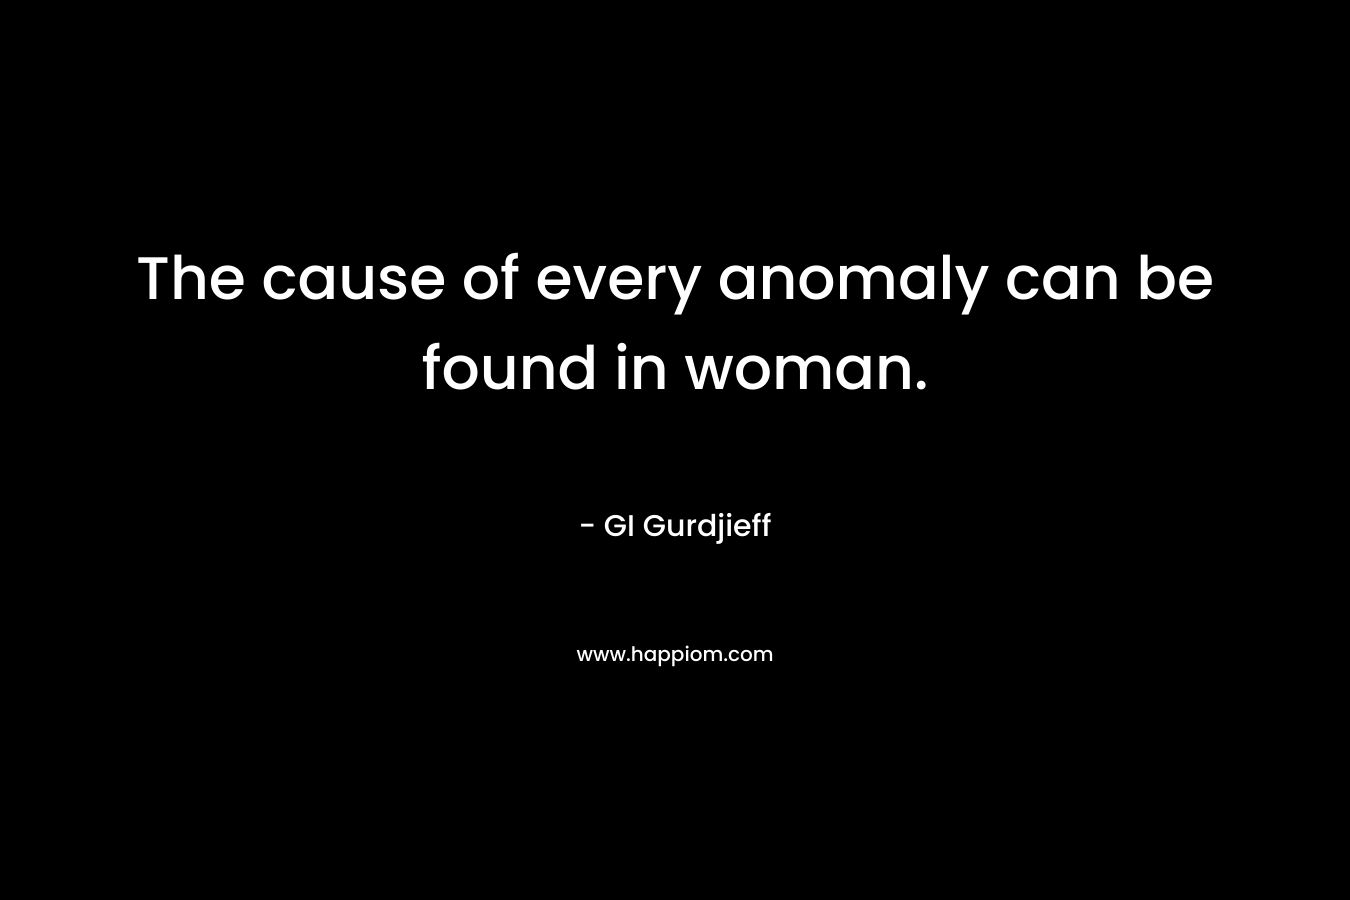 The cause of every anomaly can be found in woman. – GI Gurdjieff